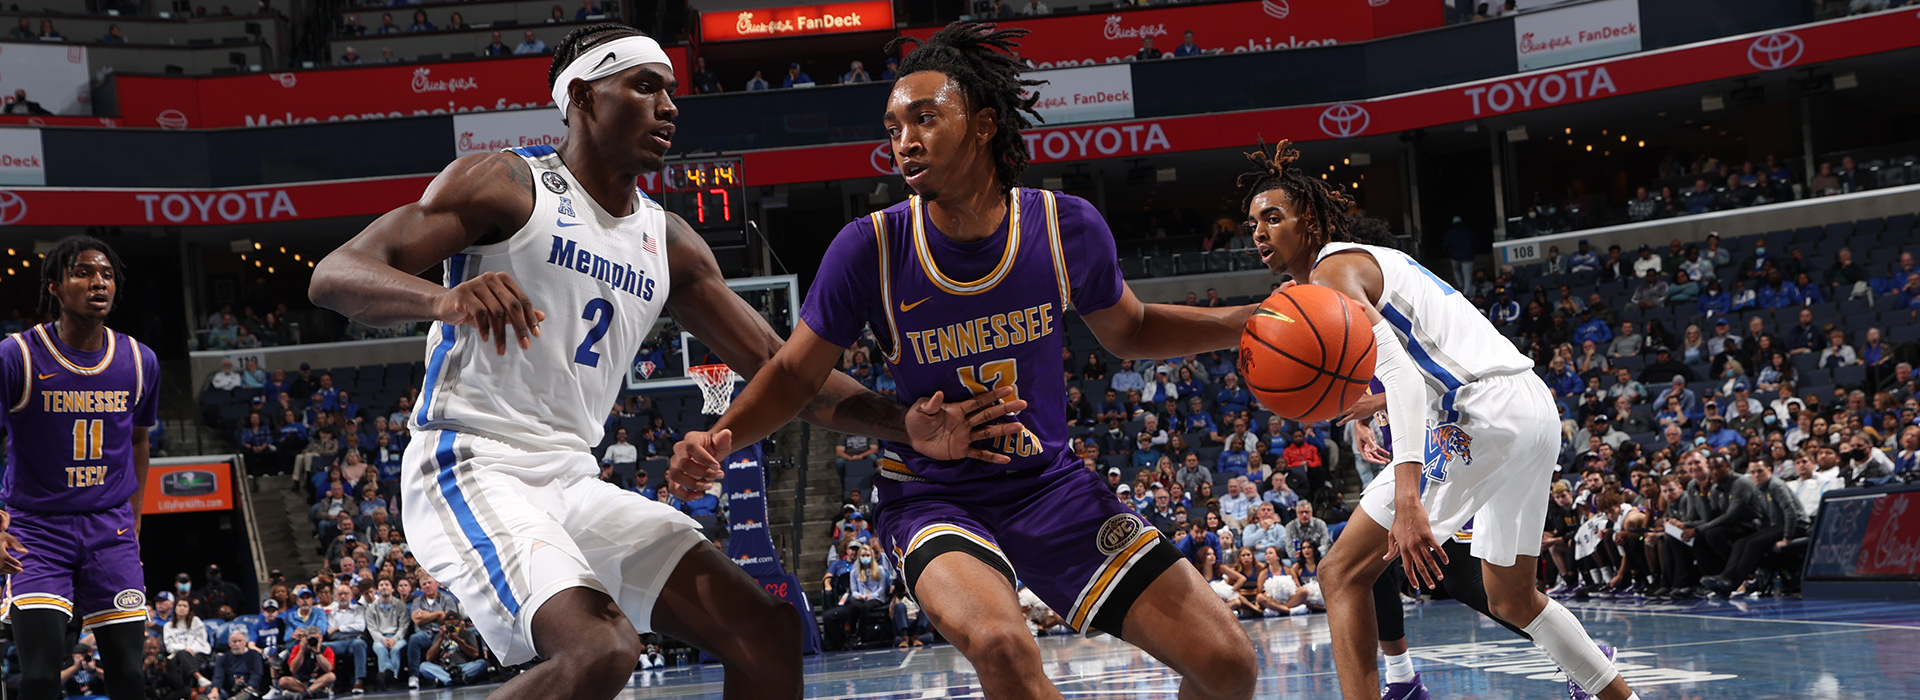 Golden Eagles fall on road to No. 12 Memphis in season opener